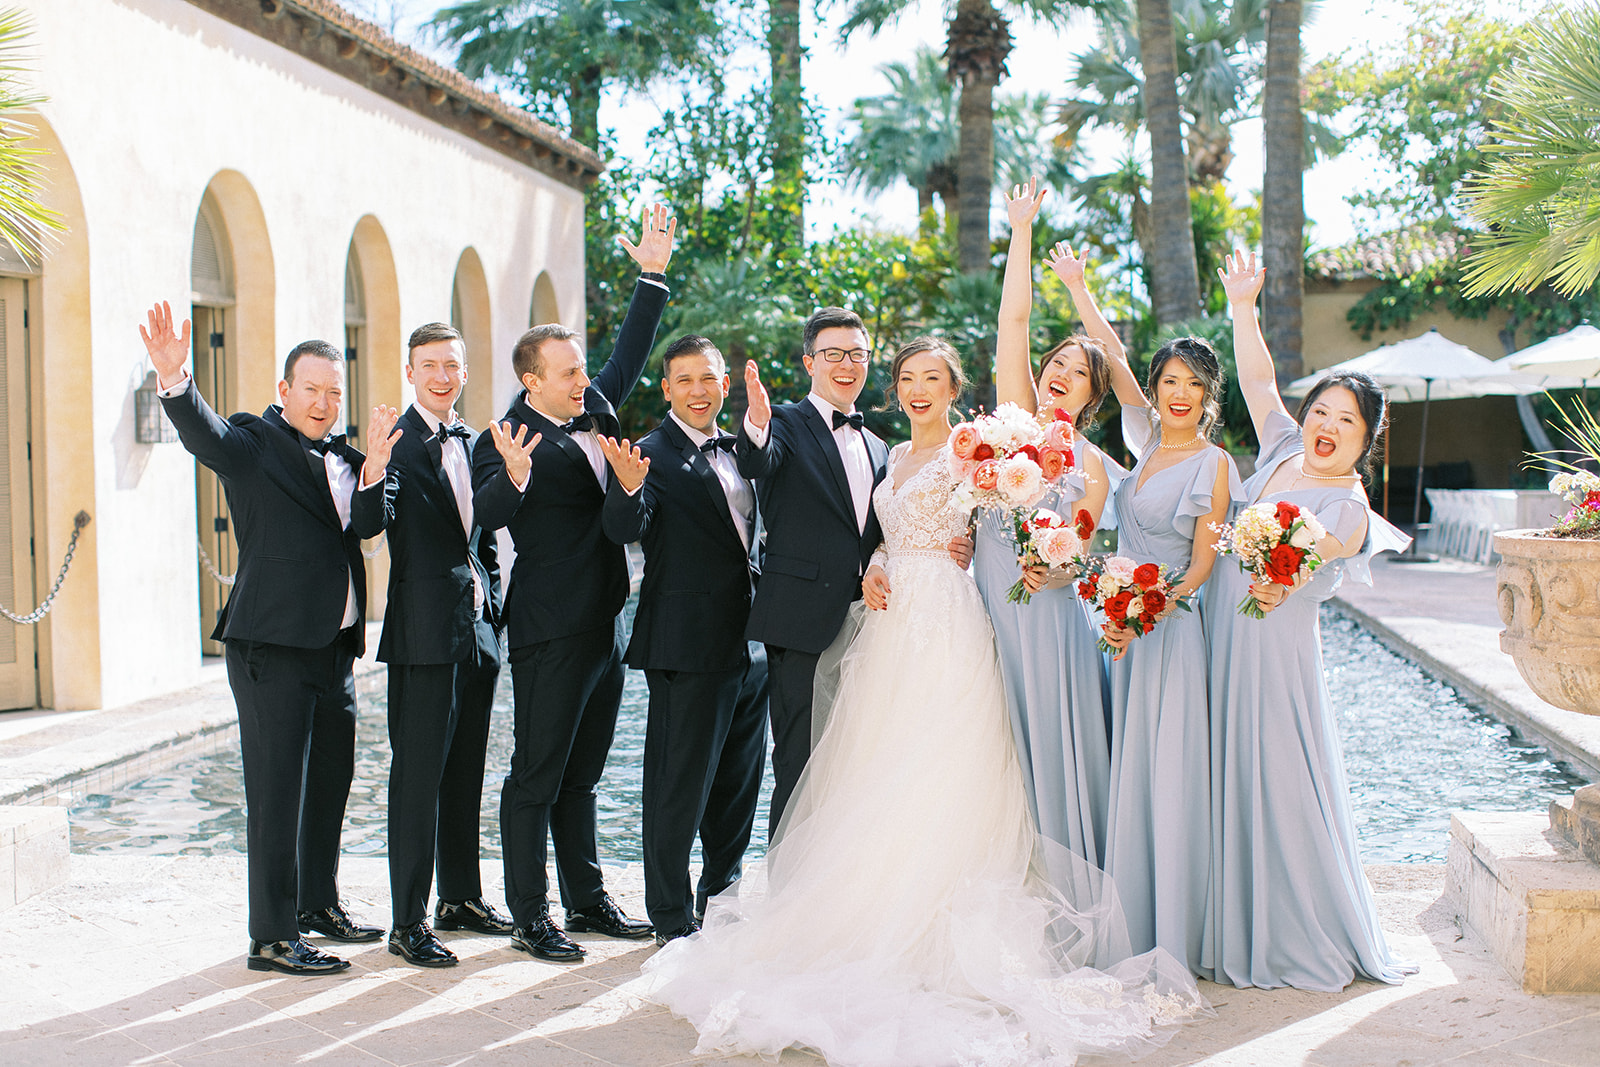 Bride and groom celebrating with bridal party in front of fountain pool at Royal Palms.